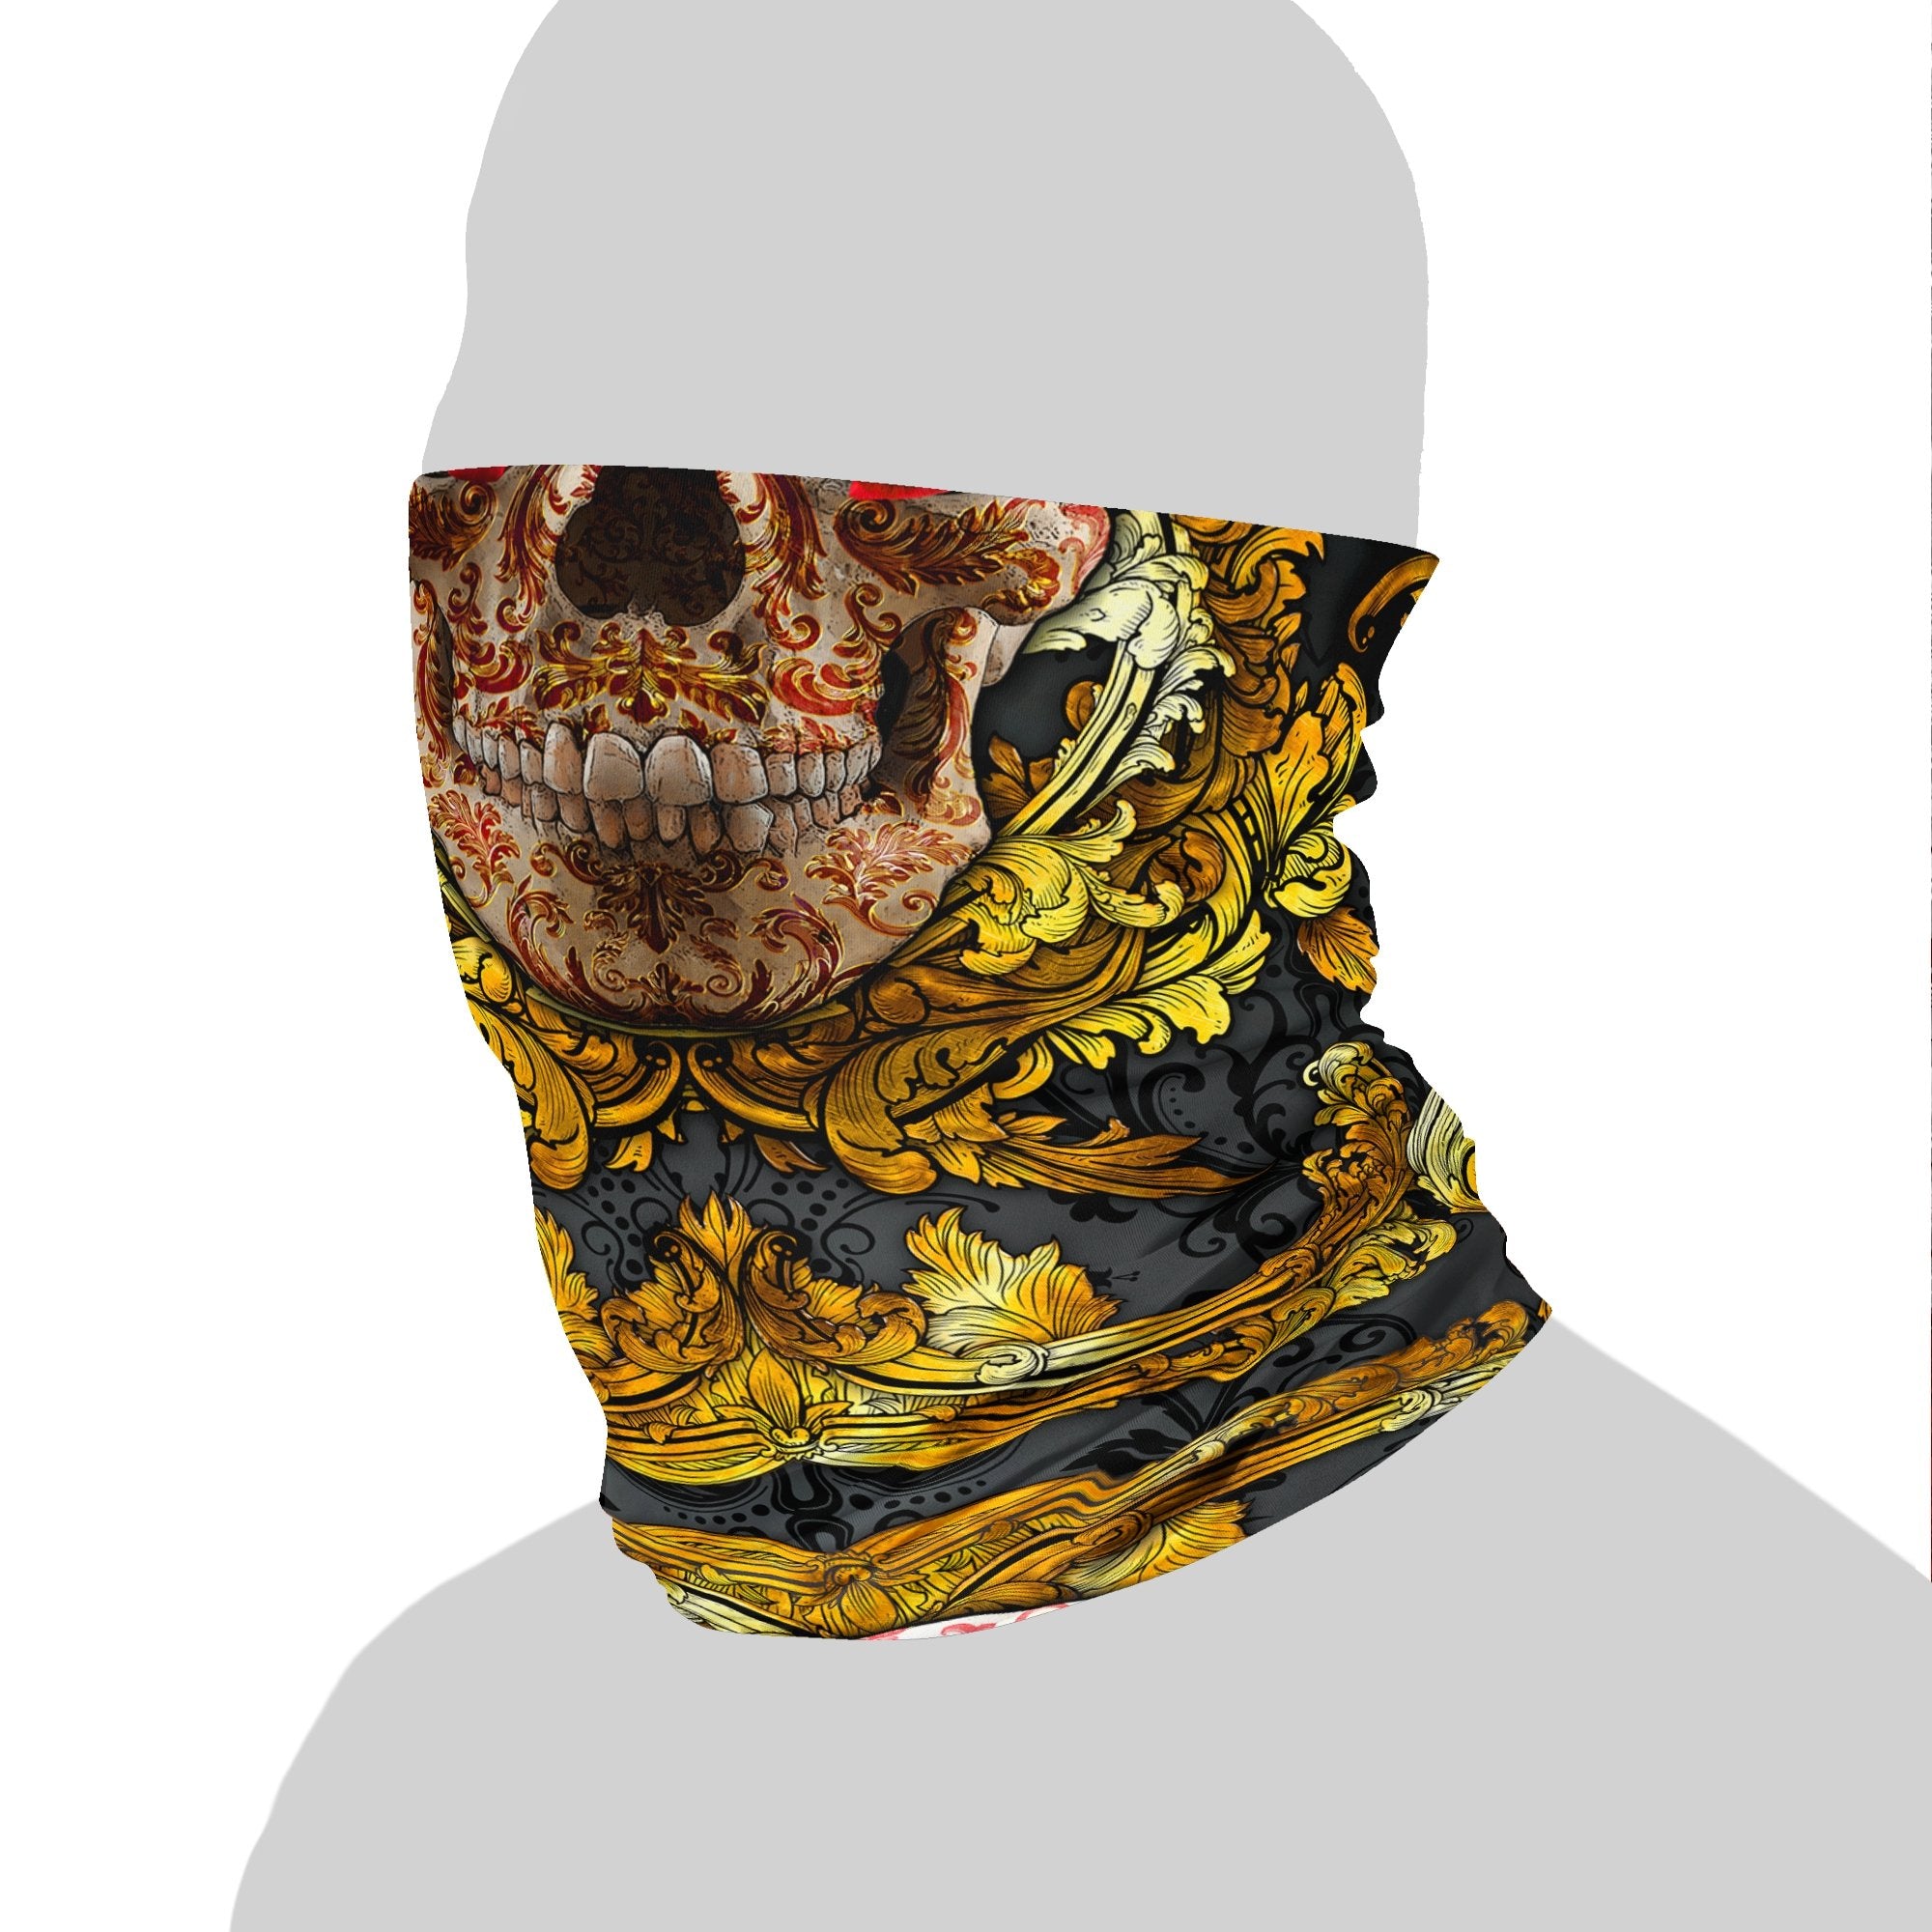 Skull Neck Gaiter, Face Mask, Head Covering, Goth Street Outfit - Gold & Red - Abysm Internal